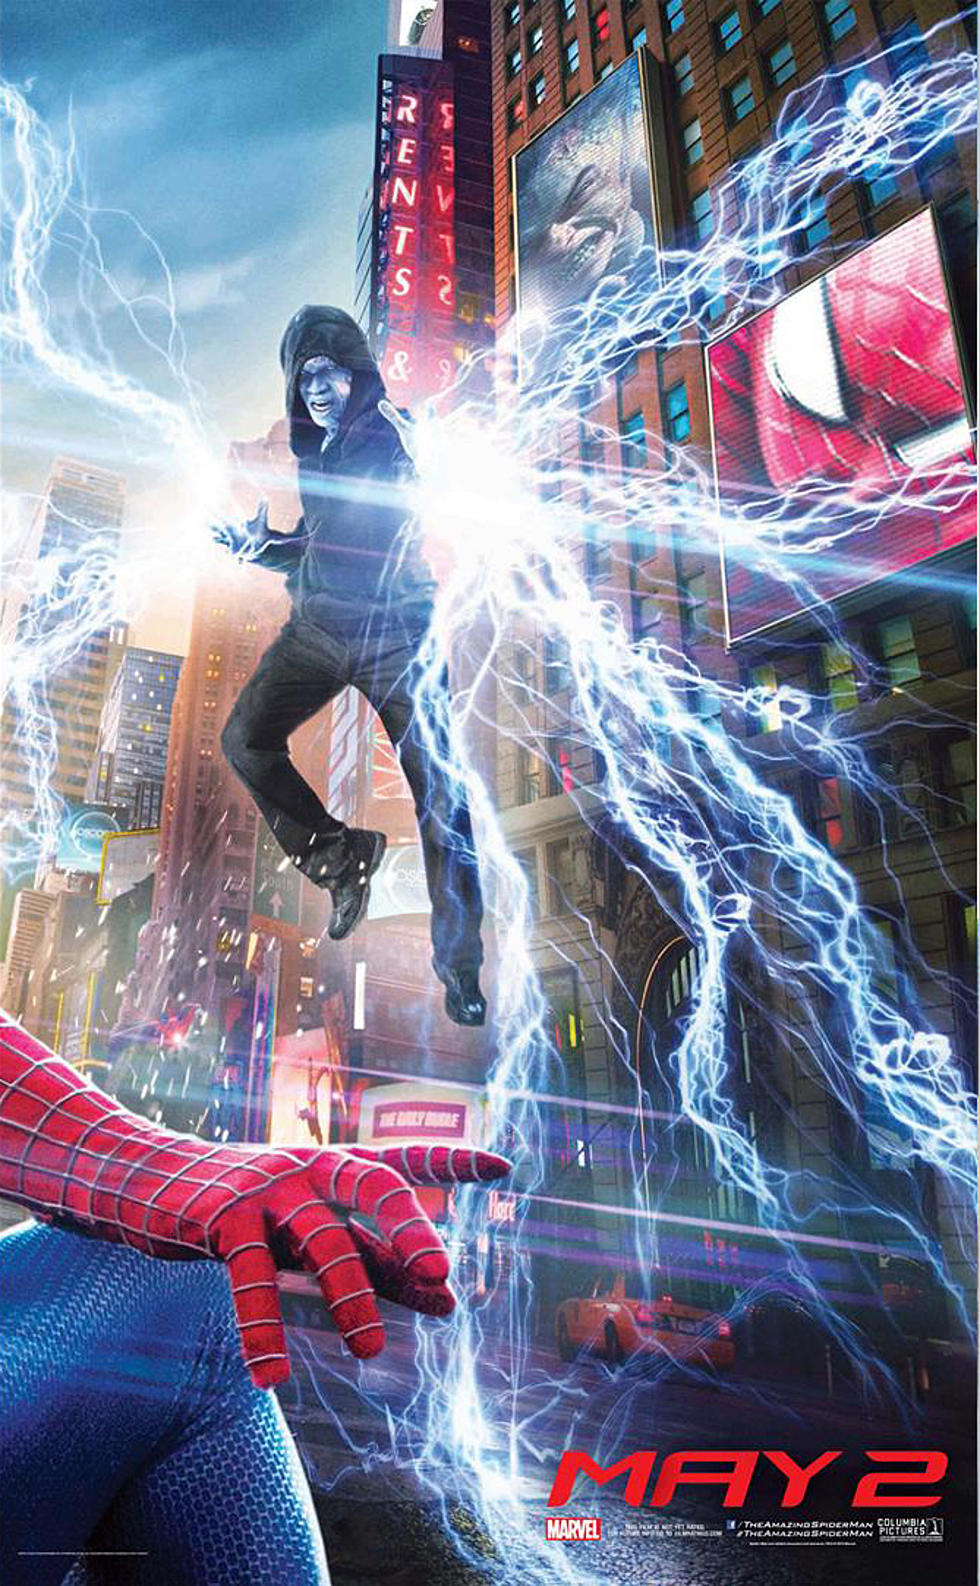 Spiderman 2 Trailer: Get To Know Electro! [VIDEO]